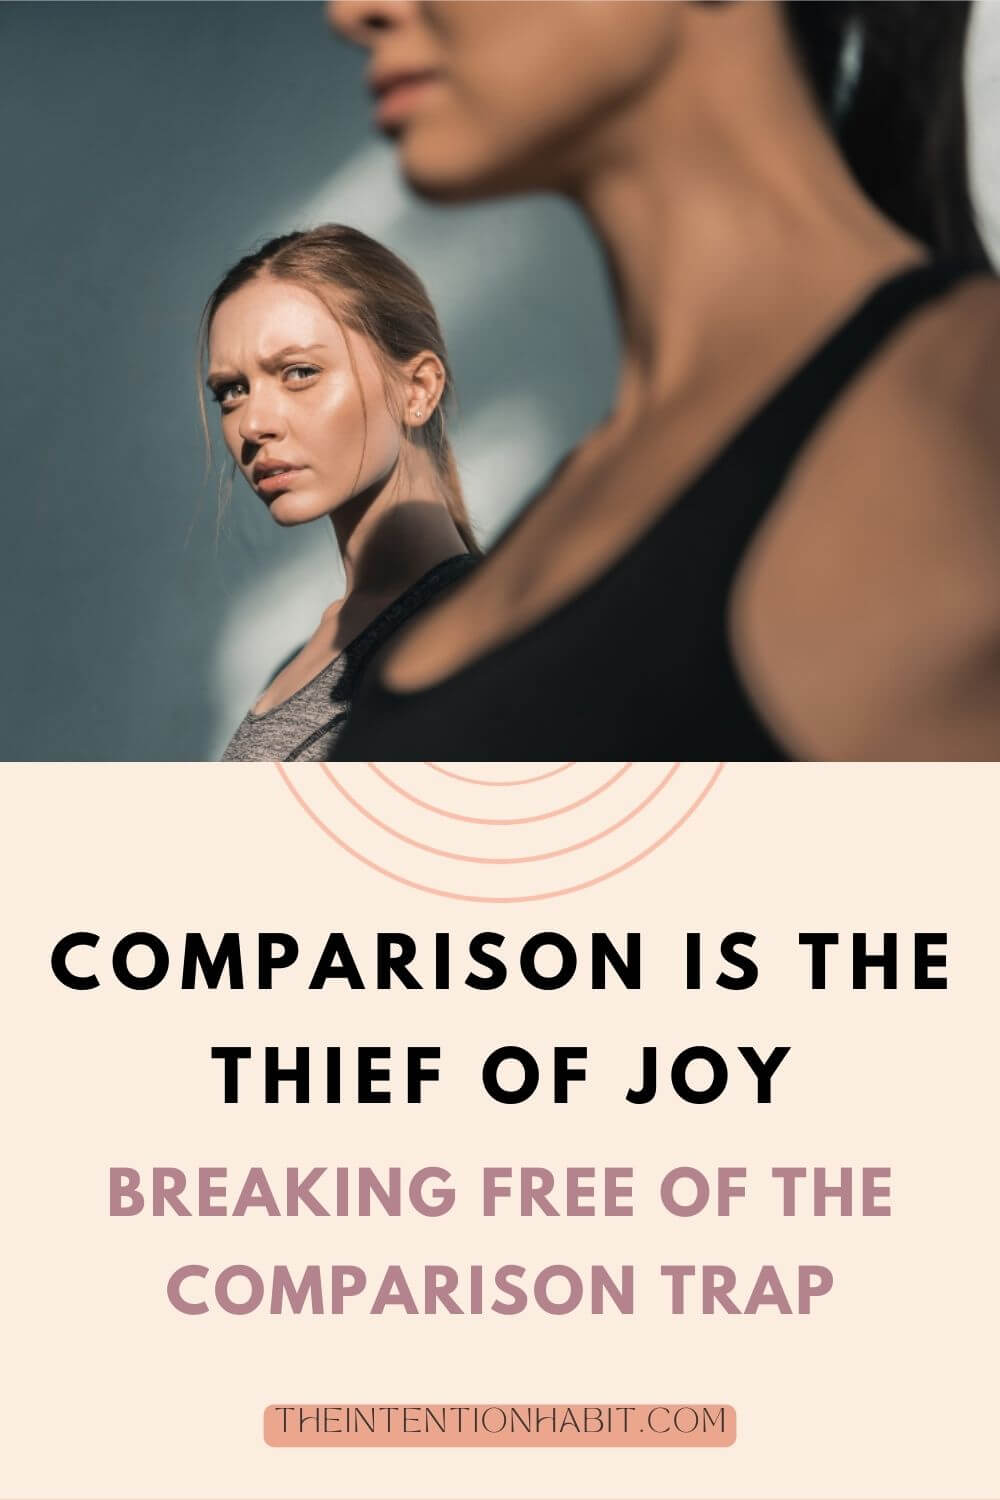 Comparison is the thief of joy breaking free of the comparison trap pinterest image.